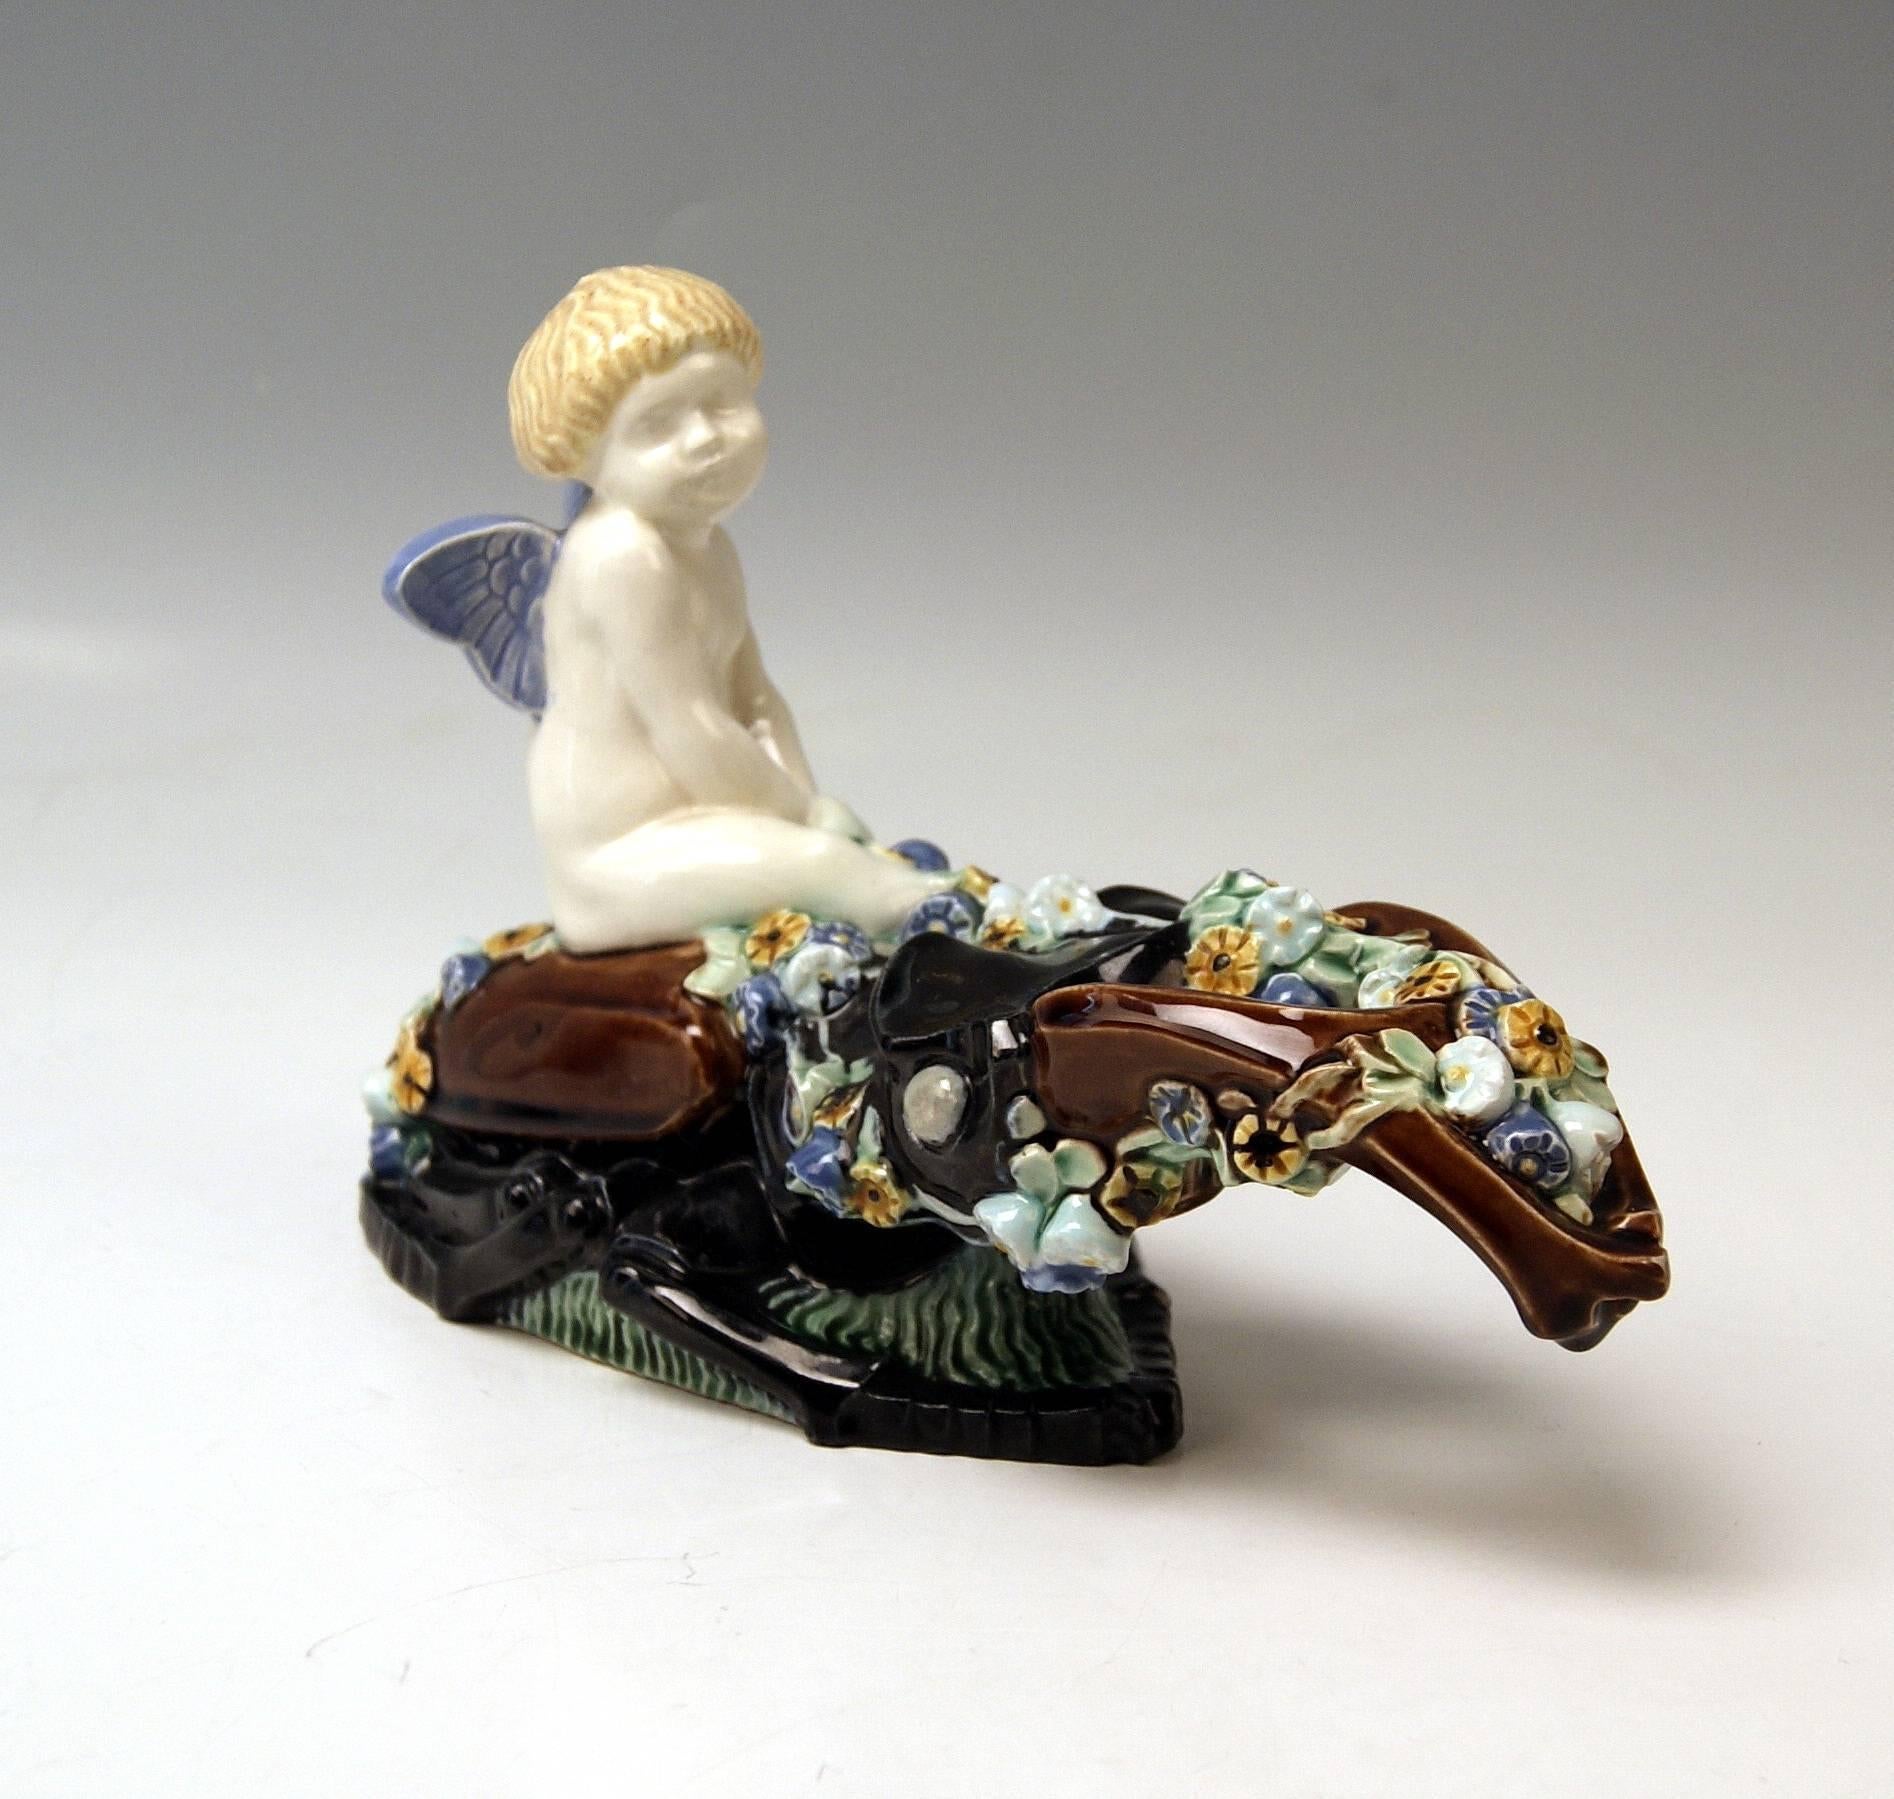 Most lovely figurine: Cherub situated on stag beetle.
Modelled by Michael Powolny (1871-1954) / (model created circa 1907-1908).

Hallmarked:
 Manufactured by Wiener Keramik (Vienna Ceramics) (WK / hallmarked).
 Material is ceramics